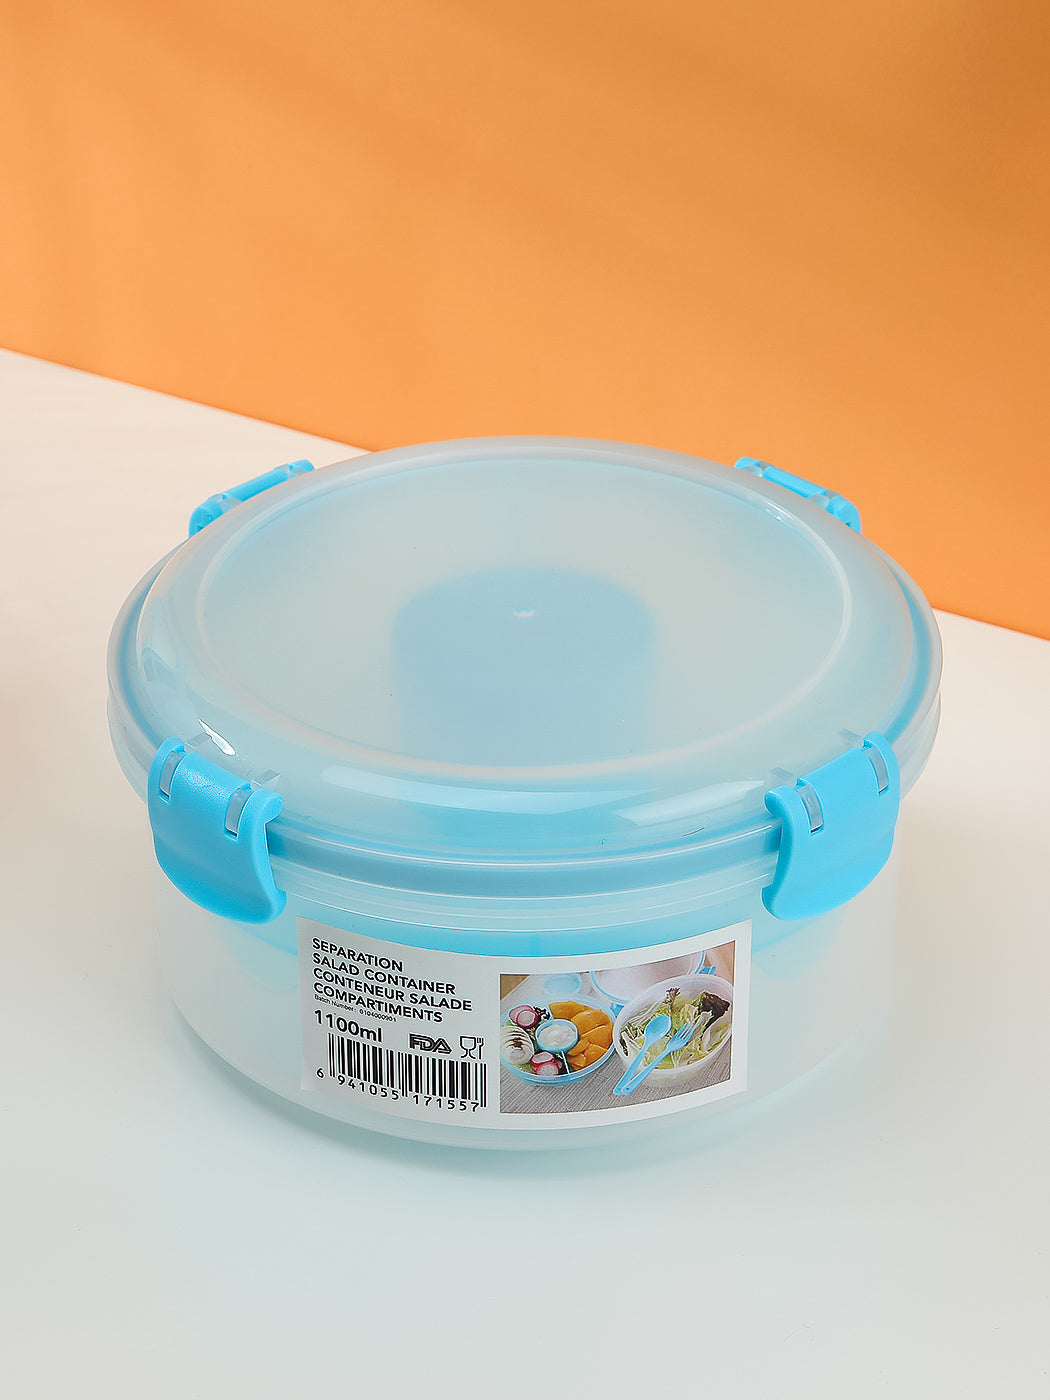 MINISO SEPARATION SALAD CONTAINER 1100ML 2008298310106 FOOD CONTAINER